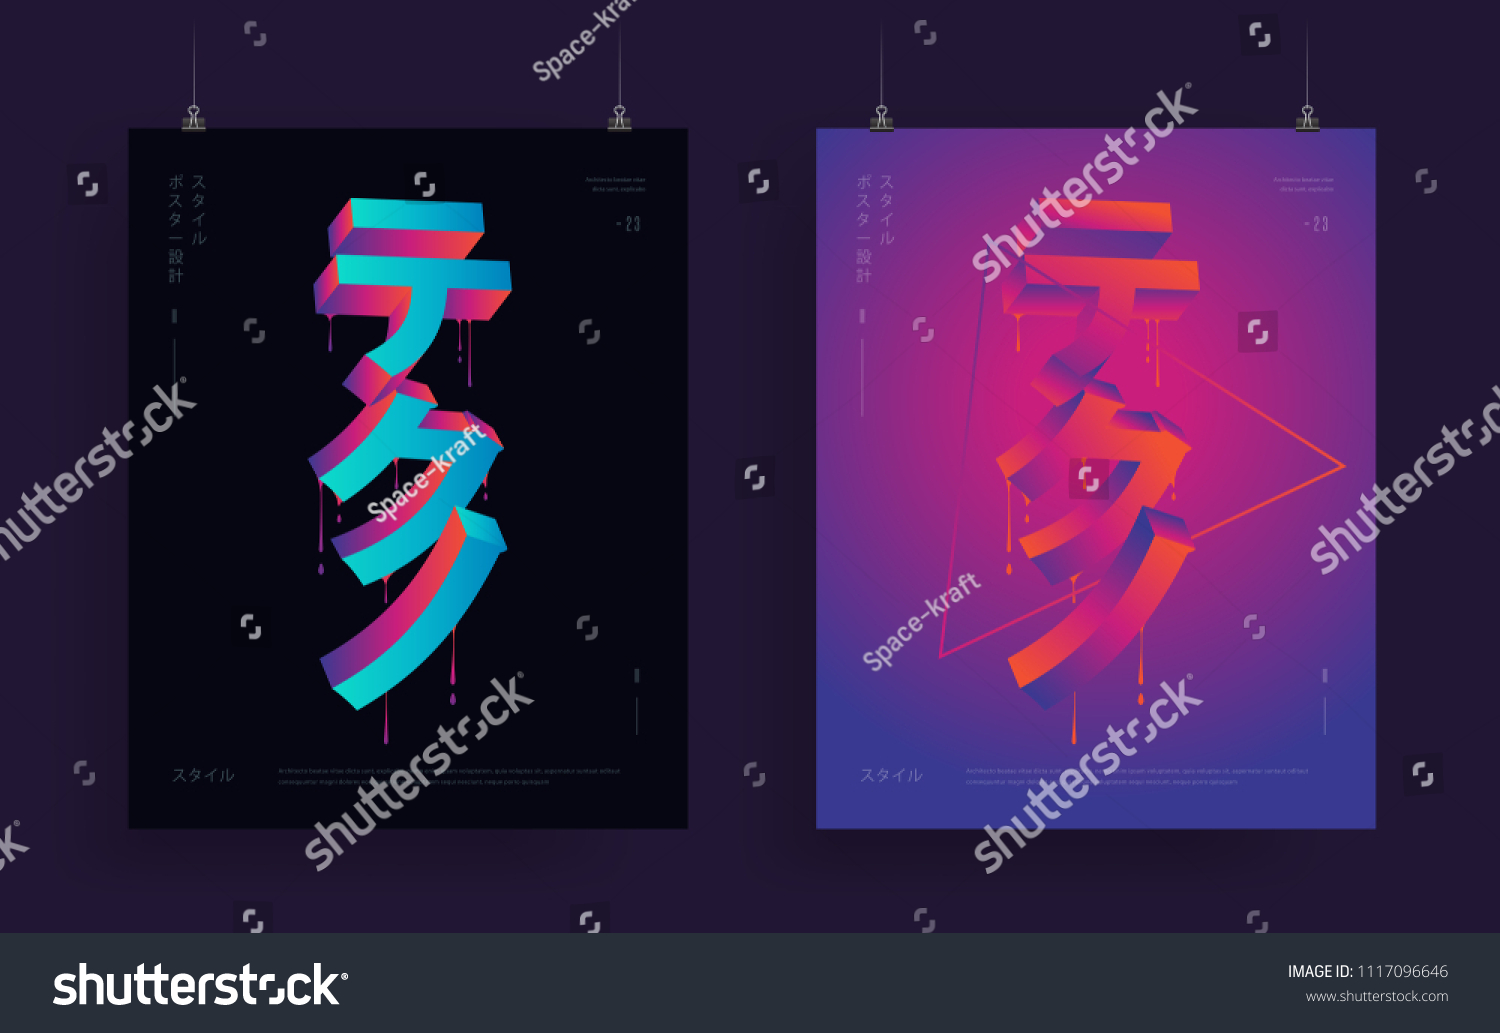 Abstract vector geometric background with 3D style japanese word (translation: «techno») on acid color with small text (translation: «poster design style»). Futuristic flyer EPS 10 illustration #1117096646